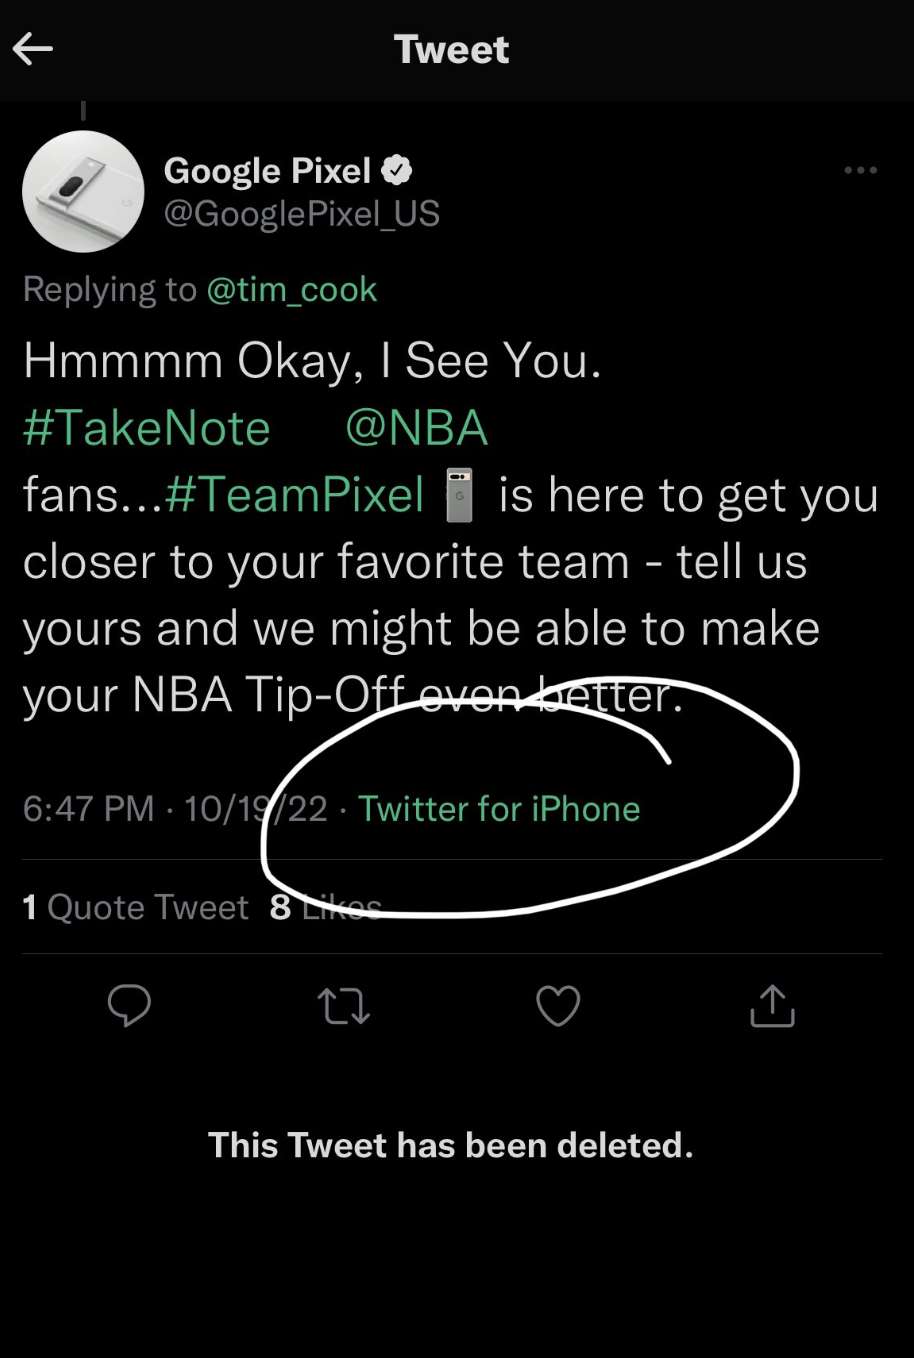 The image is a tweet of when Google accidentally tweeted from an iPhone while it is promoting a Pixel device